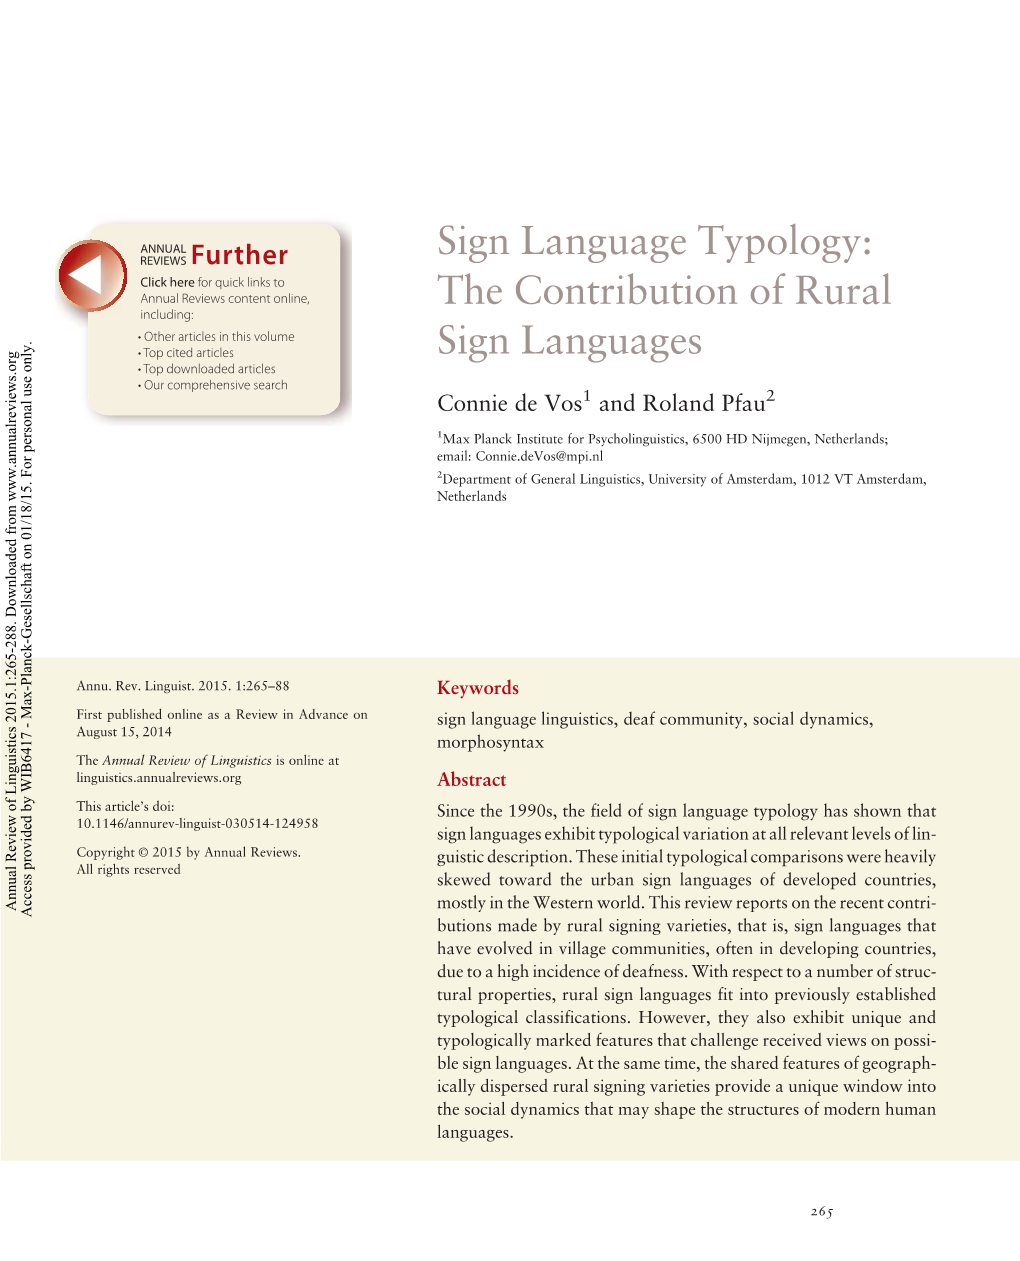 Sign Language Typology: the Contribution of Rural Sign Languages